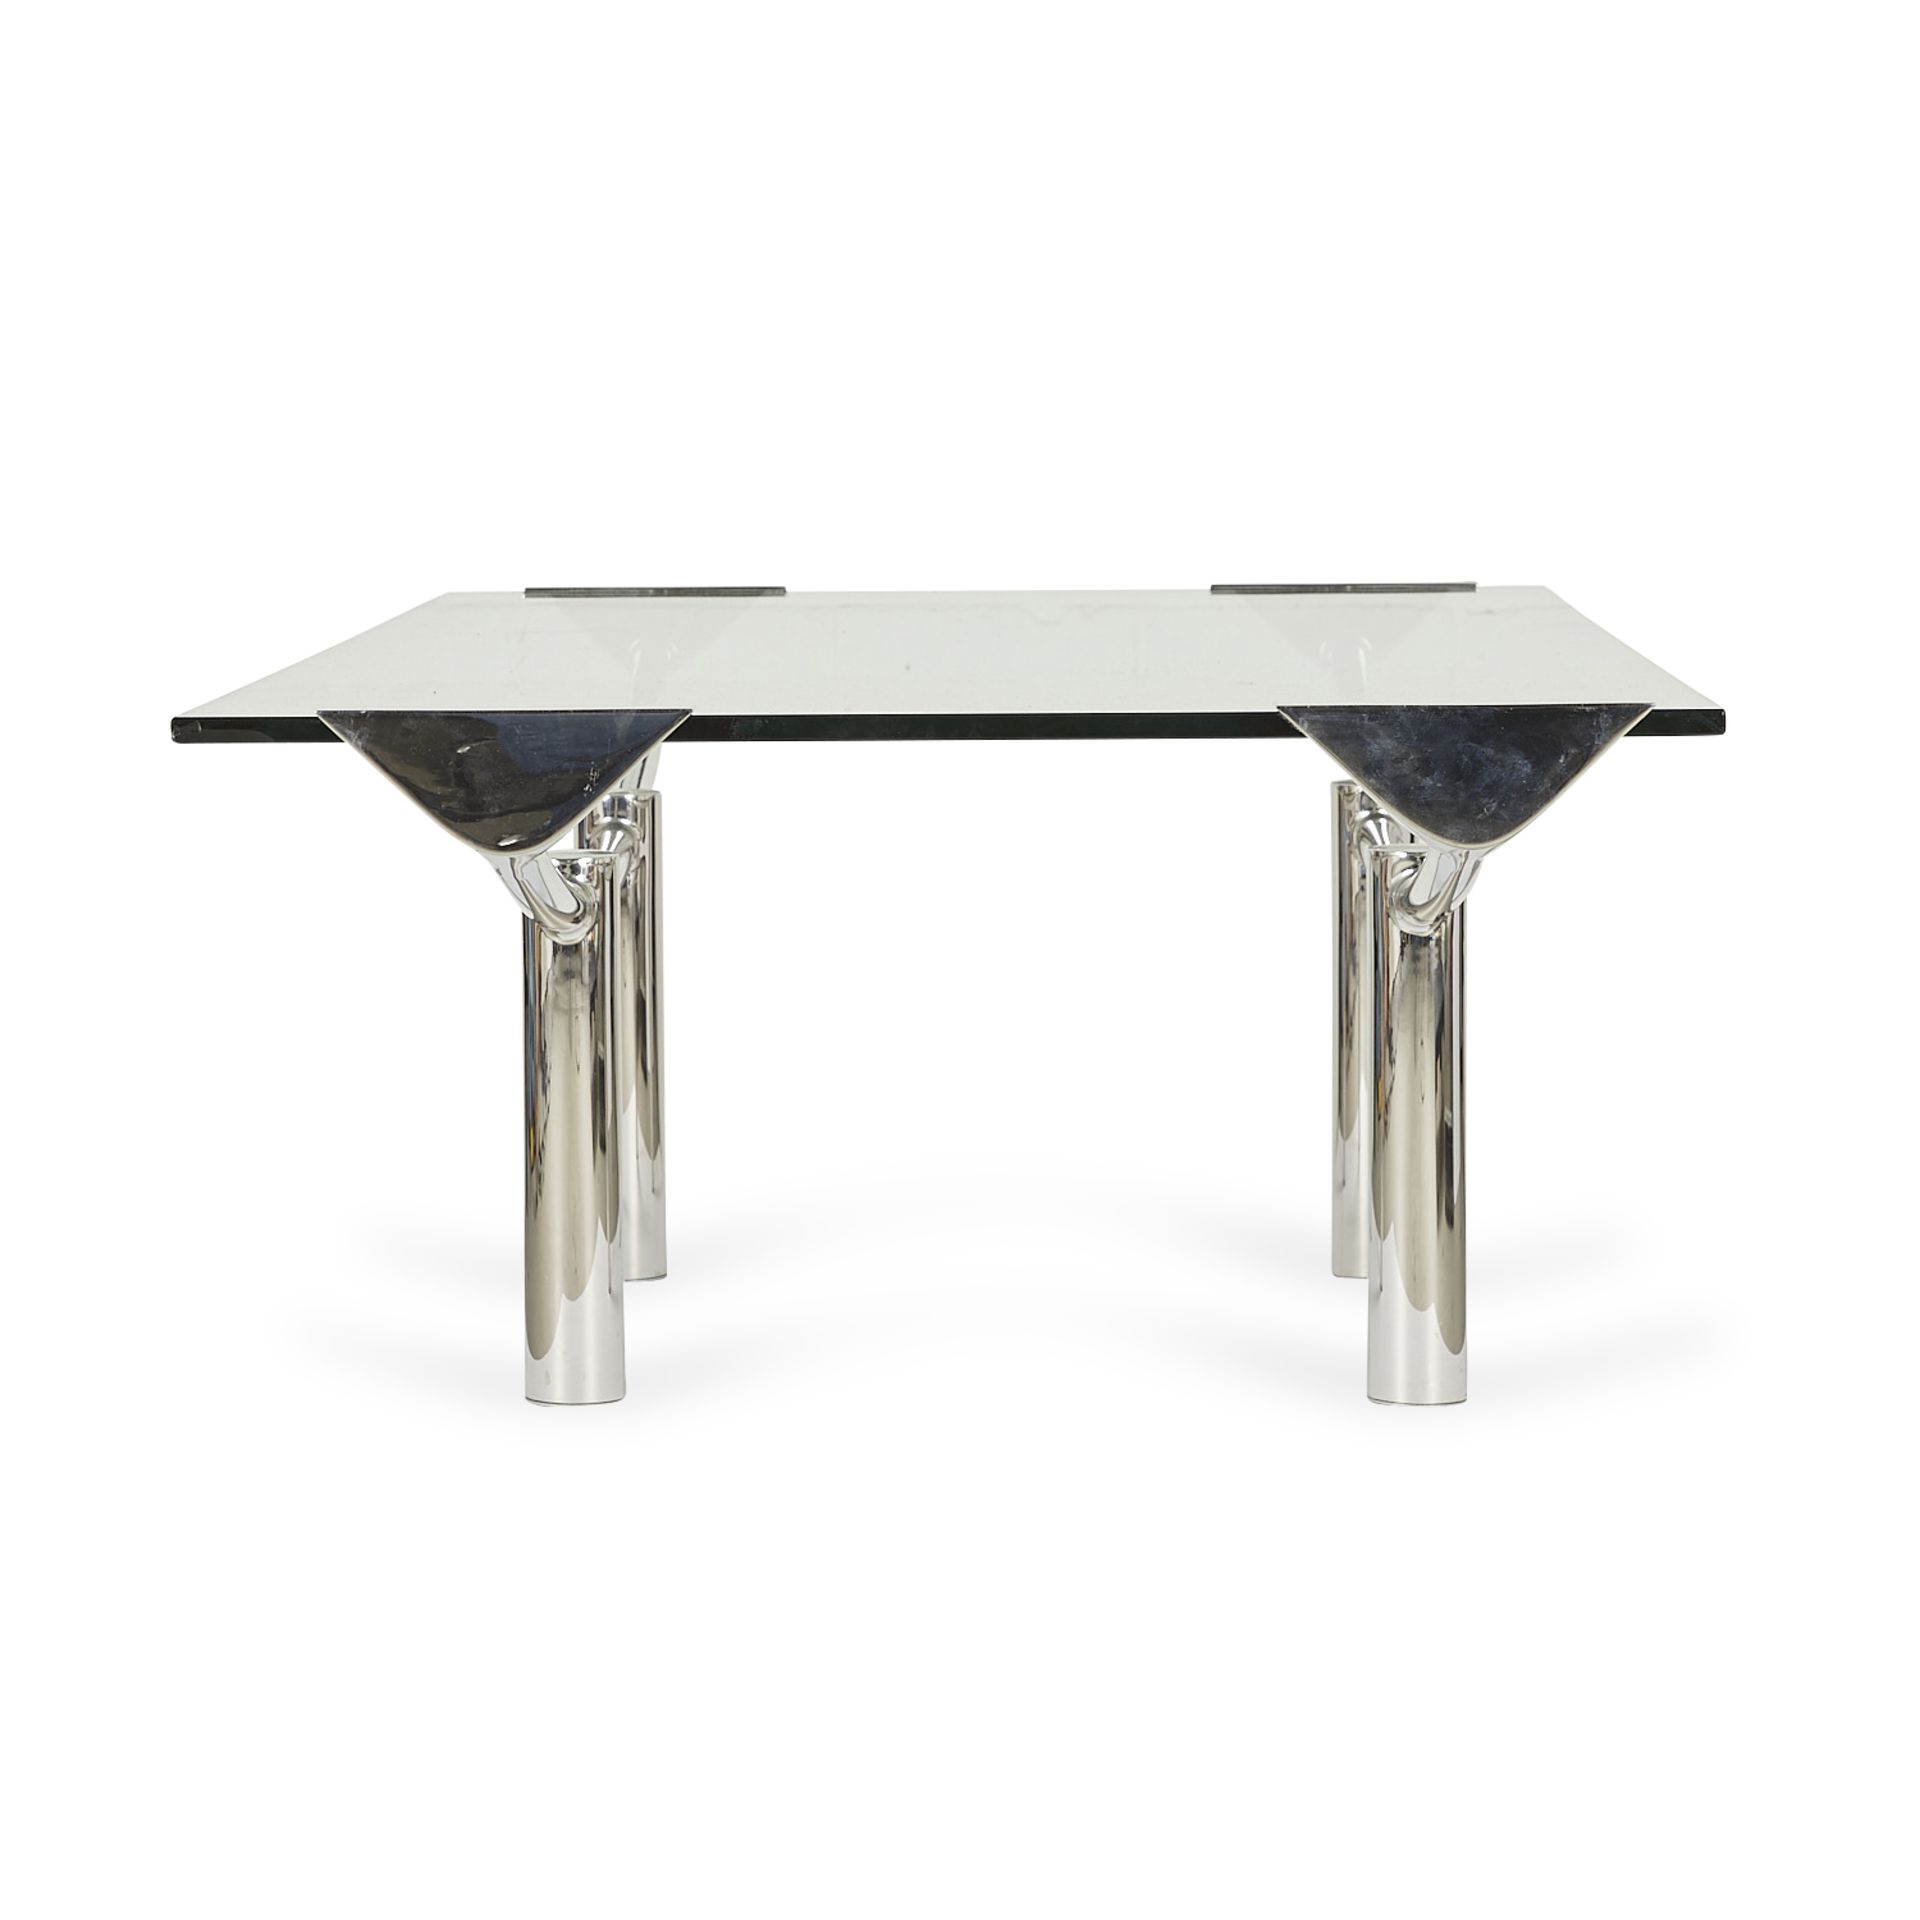 Brueton "Structures" Low Coffee Table w/ Glass Top - Image 6 of 12